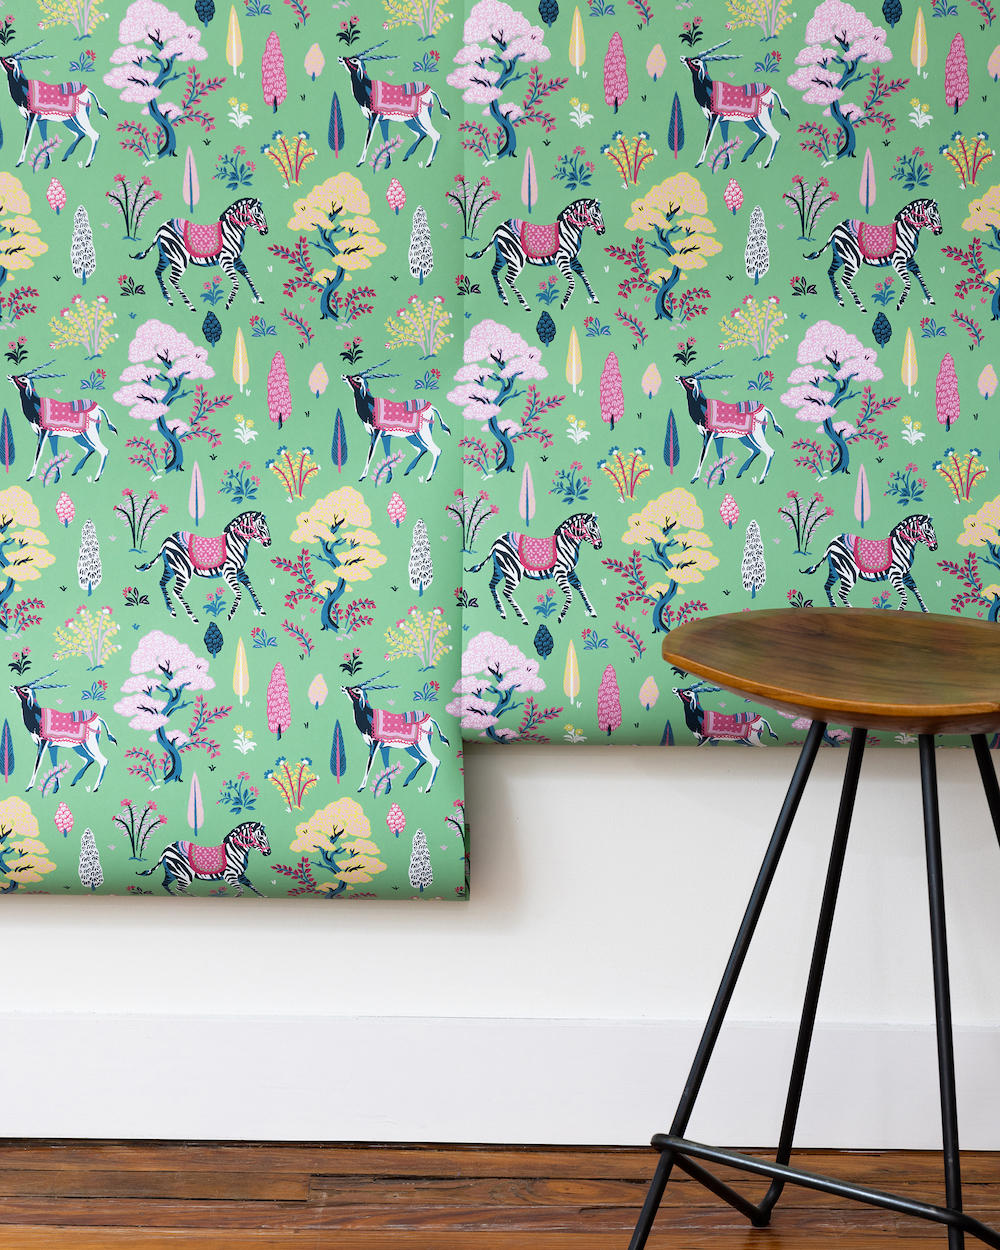 Fresh launches from Jonathan Adler, Emma Hayes Textiles and more